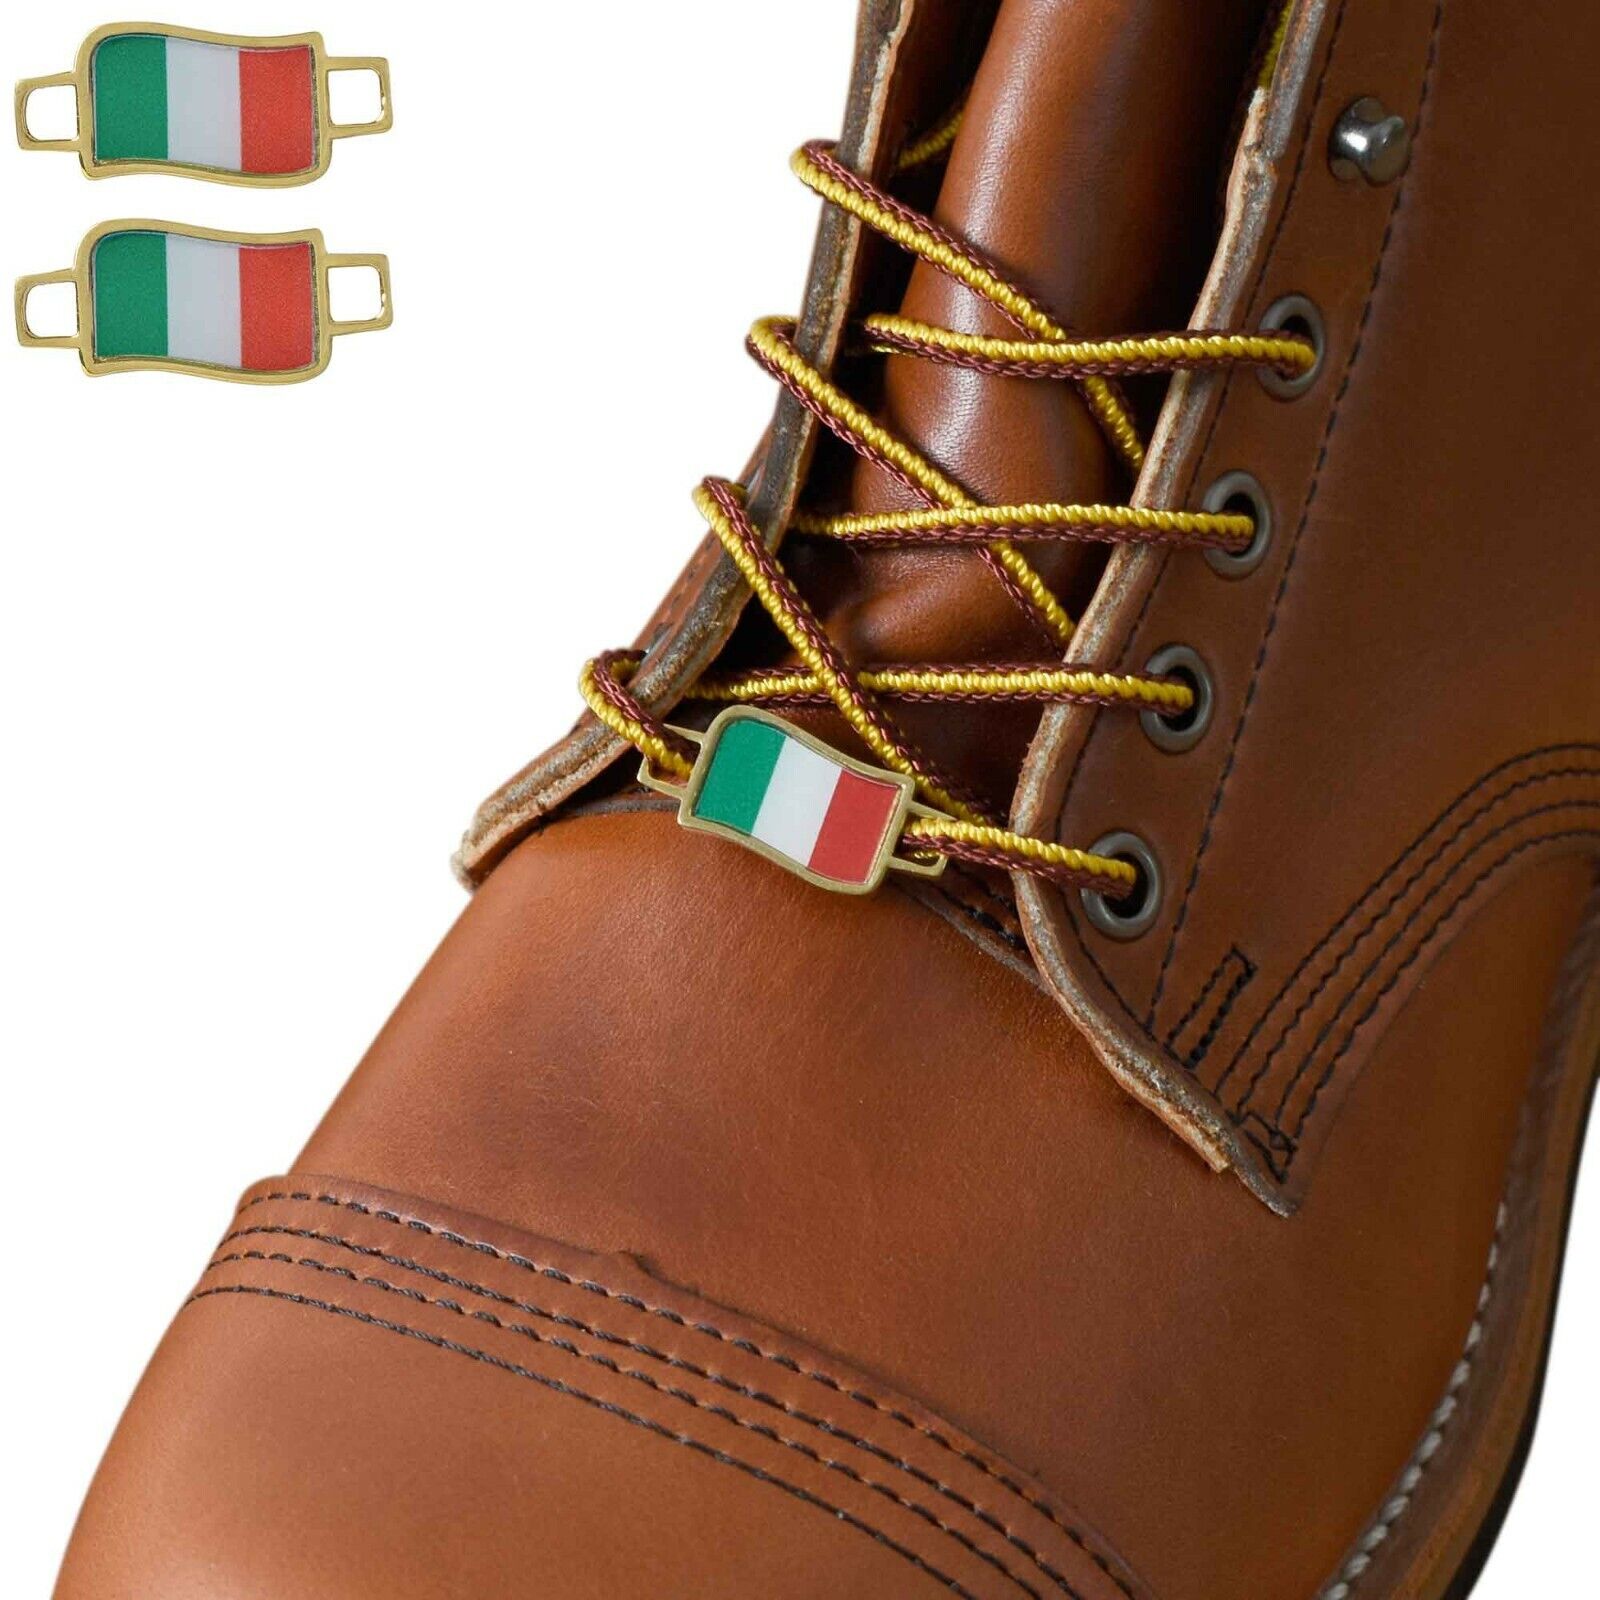 Italy Flags Shoes Boot Shoelace Keeper Holder Charm BrooklynMaker